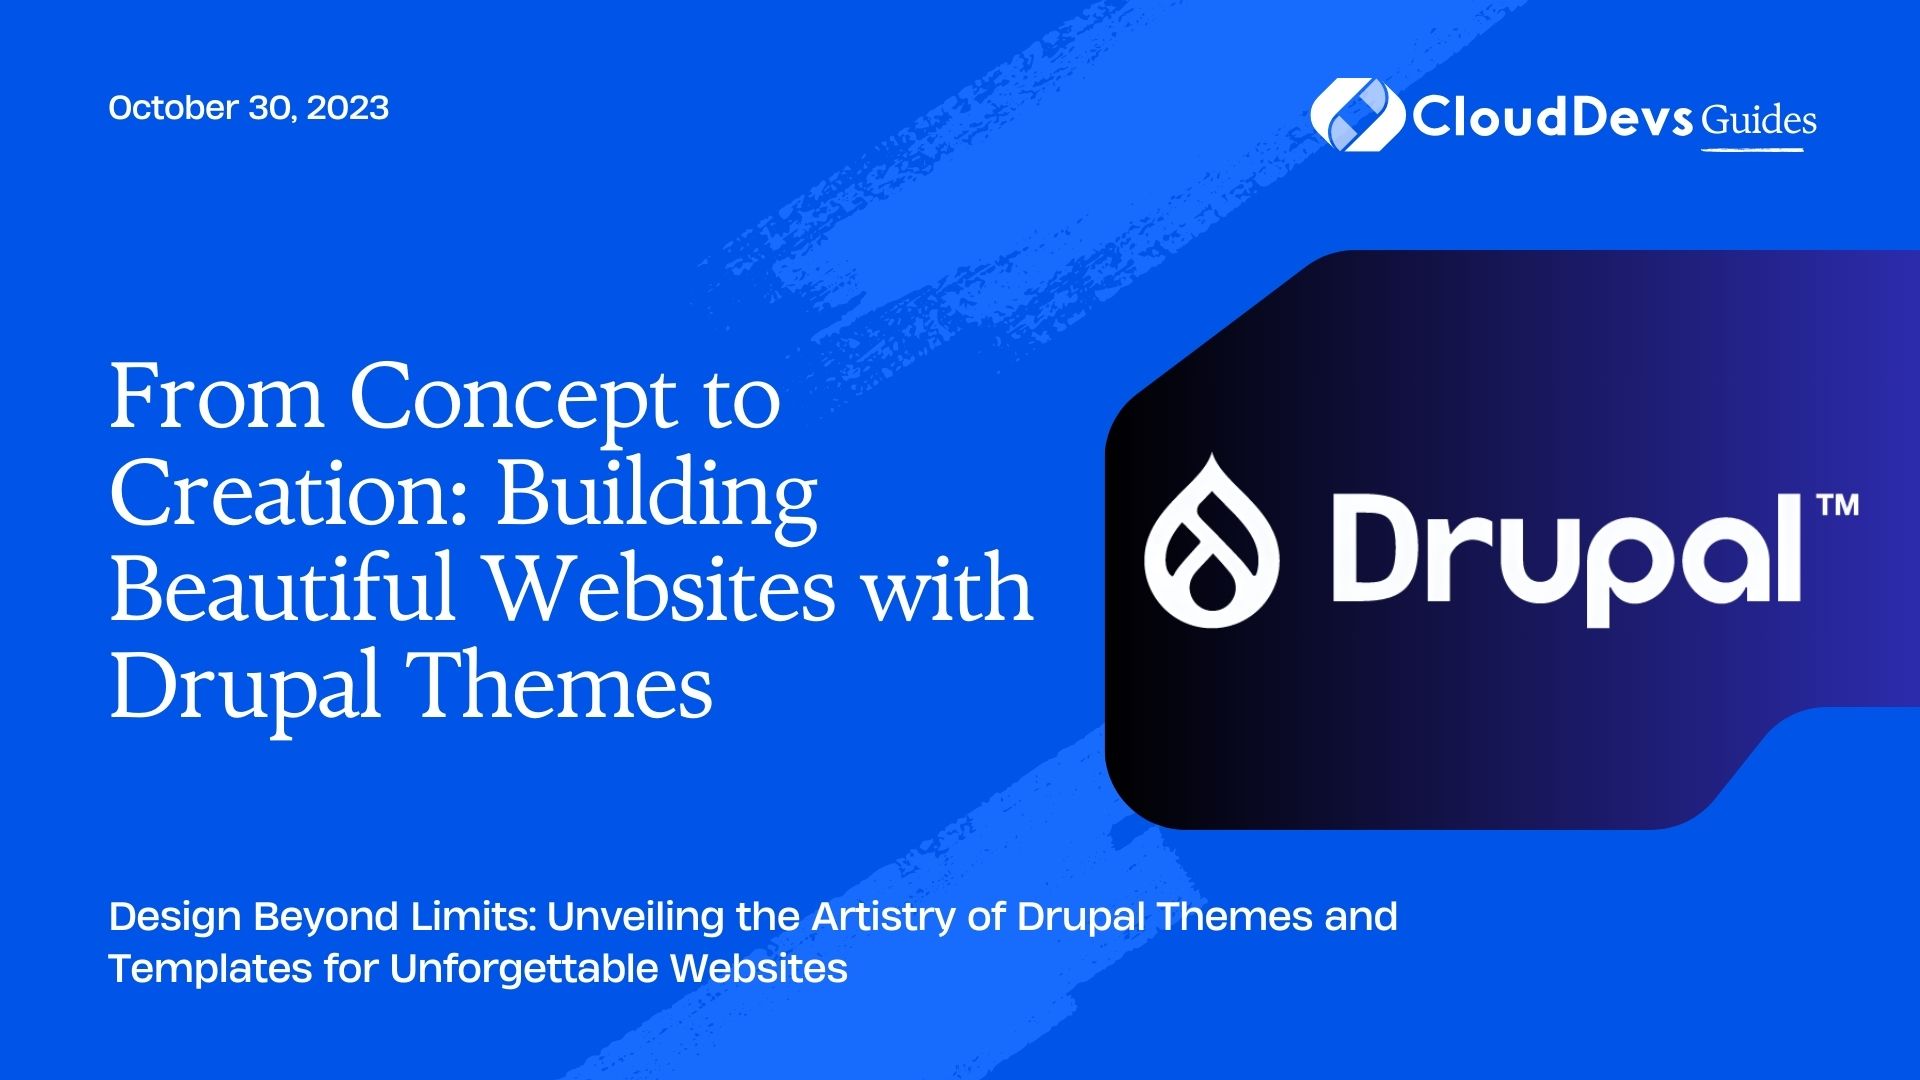 From Concept to Creation: Building Beautiful Websites with Drupal Themes